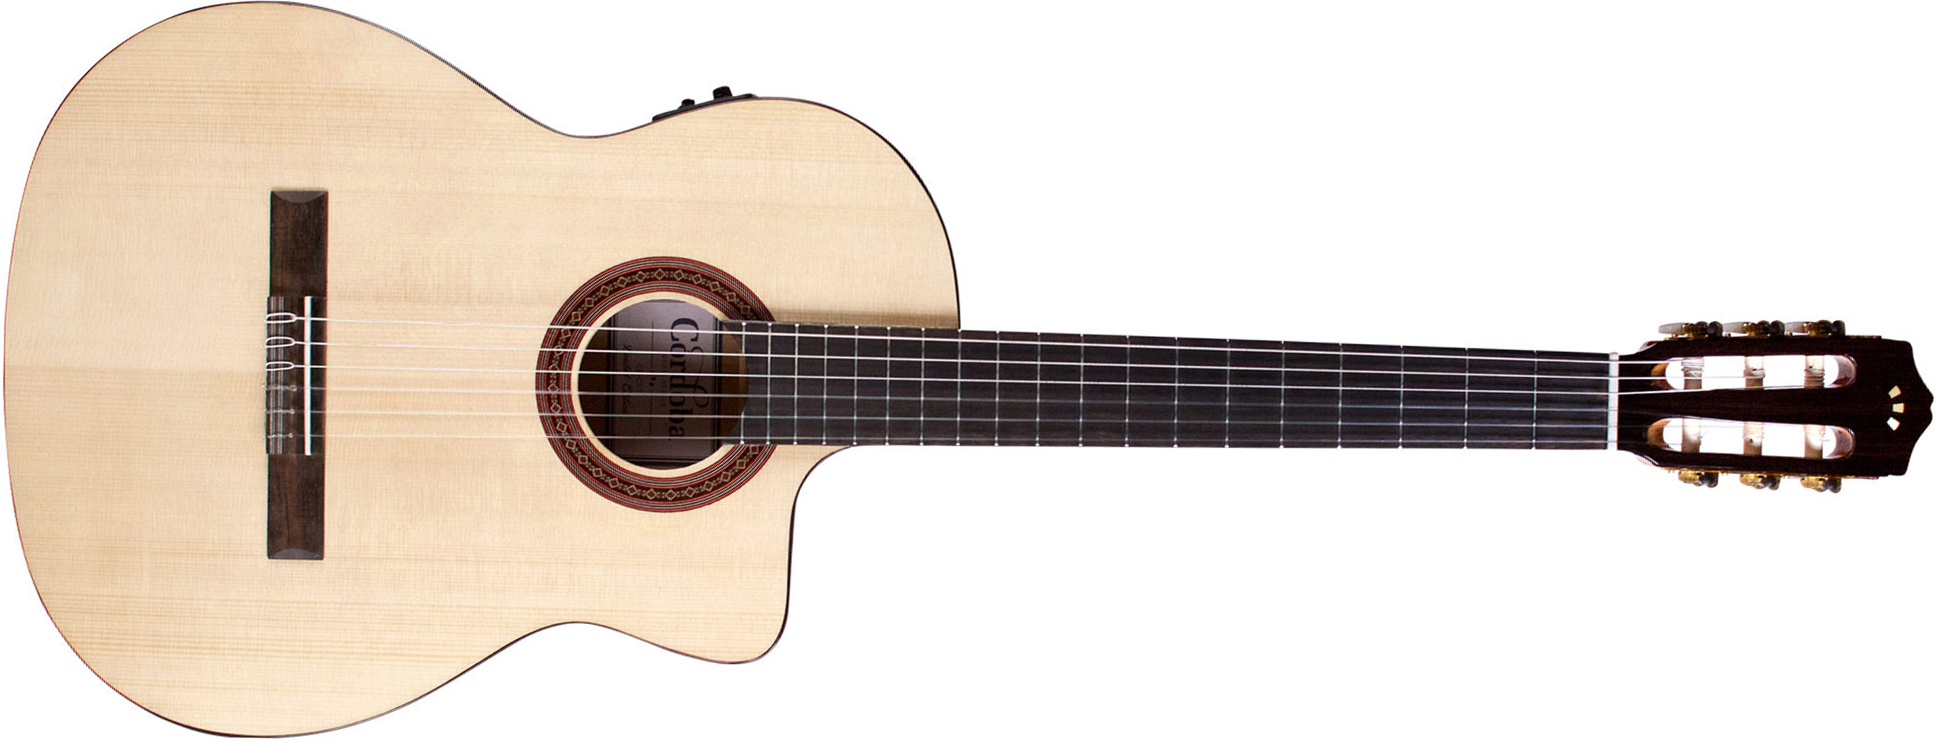 Cordoba C5 Cet Spalted Maple Limited Thinbody Cw Epicea Erable Pf - Natural - Guitare Classique Format 4/4 - Main picture